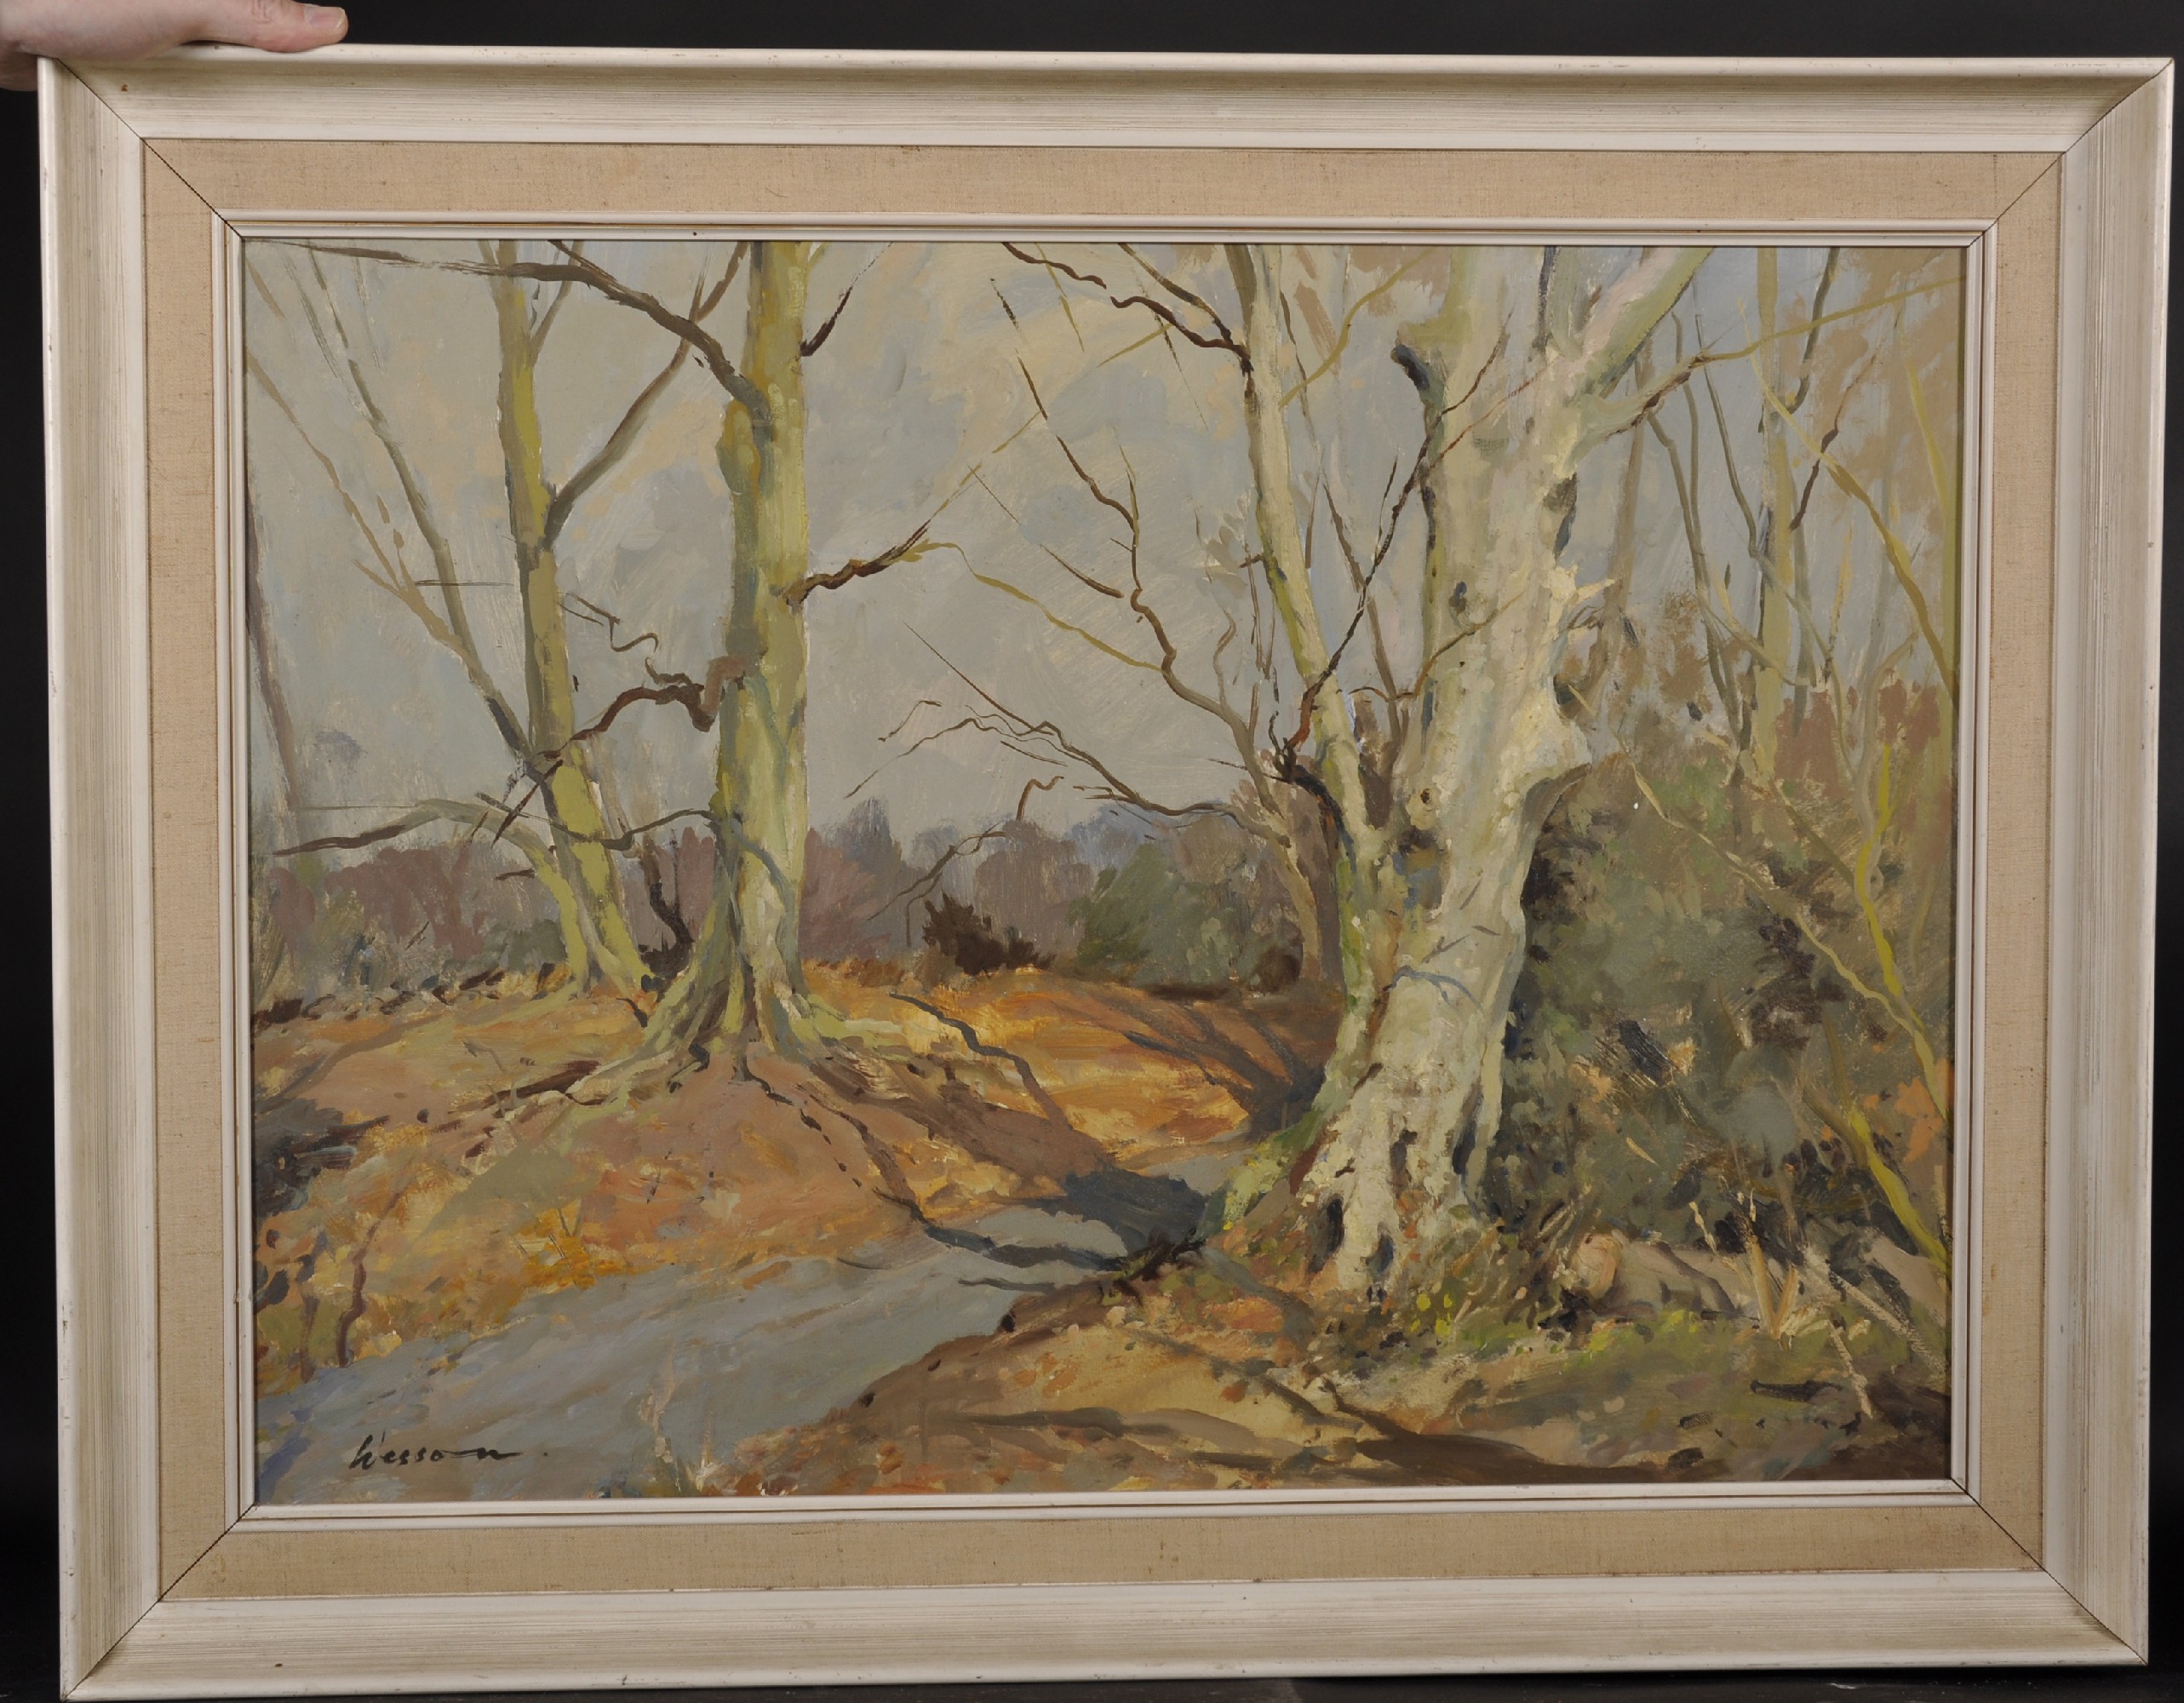 Edward Wesson (1910-1983) British. "Beech Trees, Nr Abinger Hammer", (Surrey), Oil on Board, Signed, - Image 2 of 6